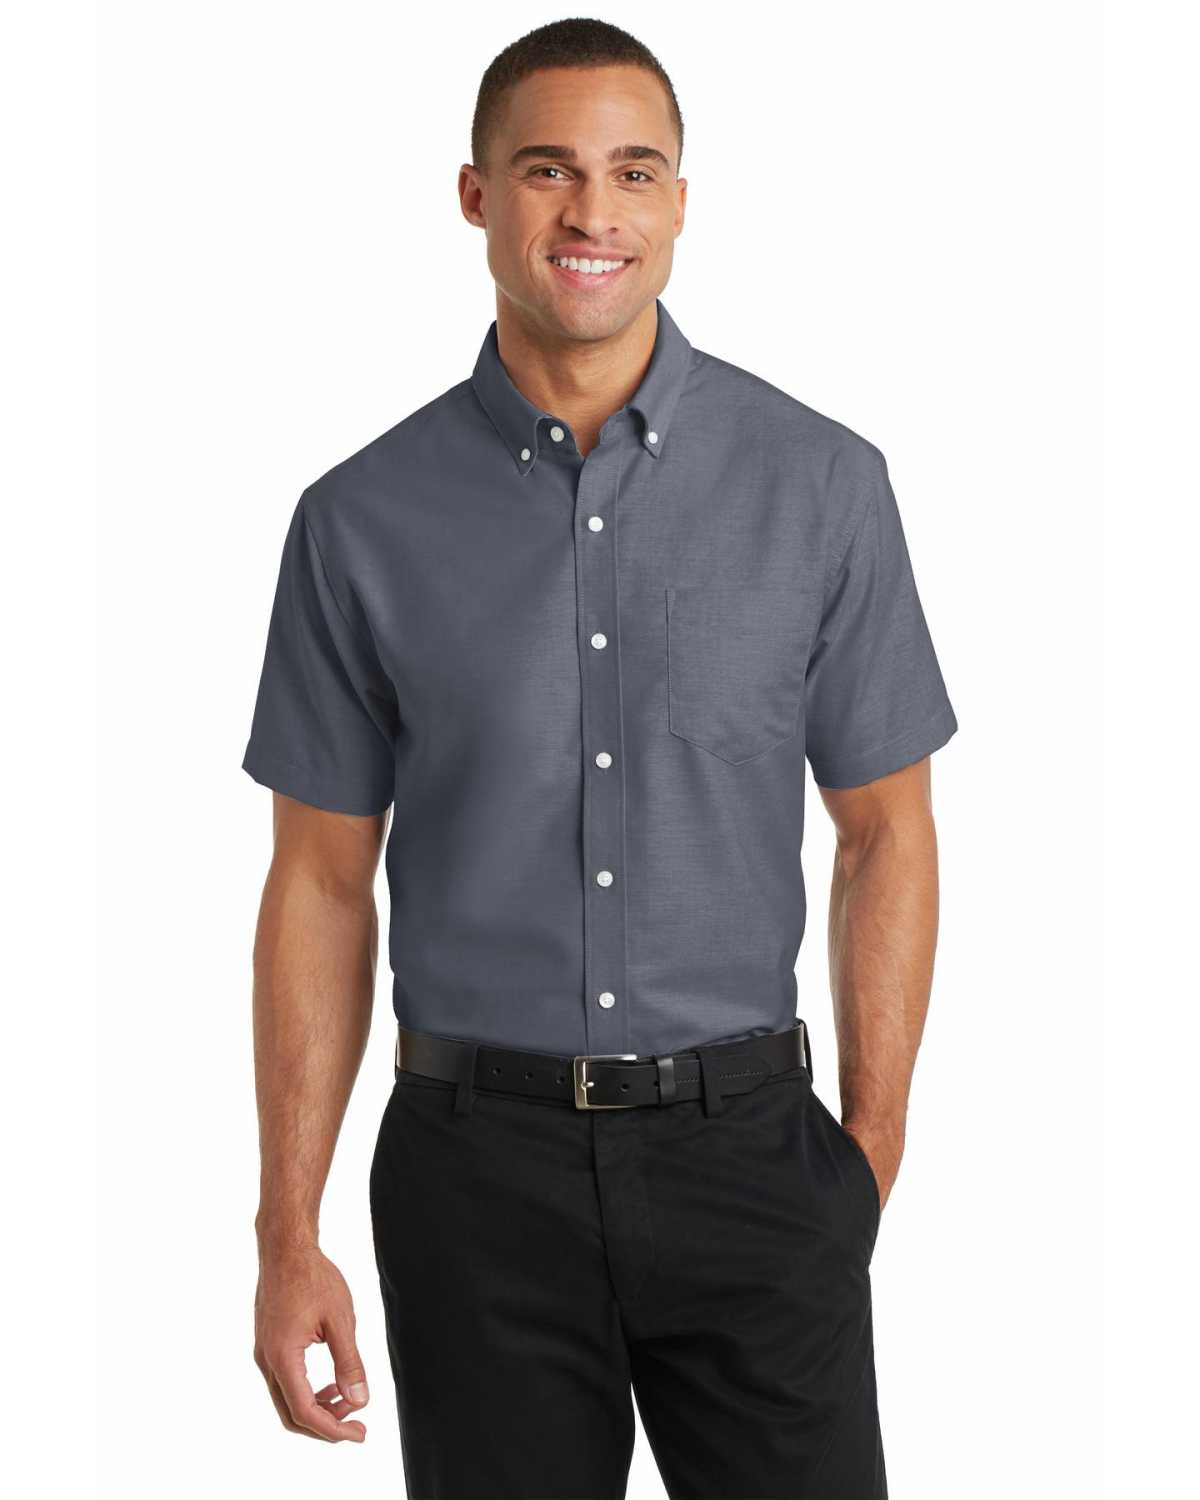 Port Authority S659 Short Sleeve SuperPro Oxford Shirt on discount ...